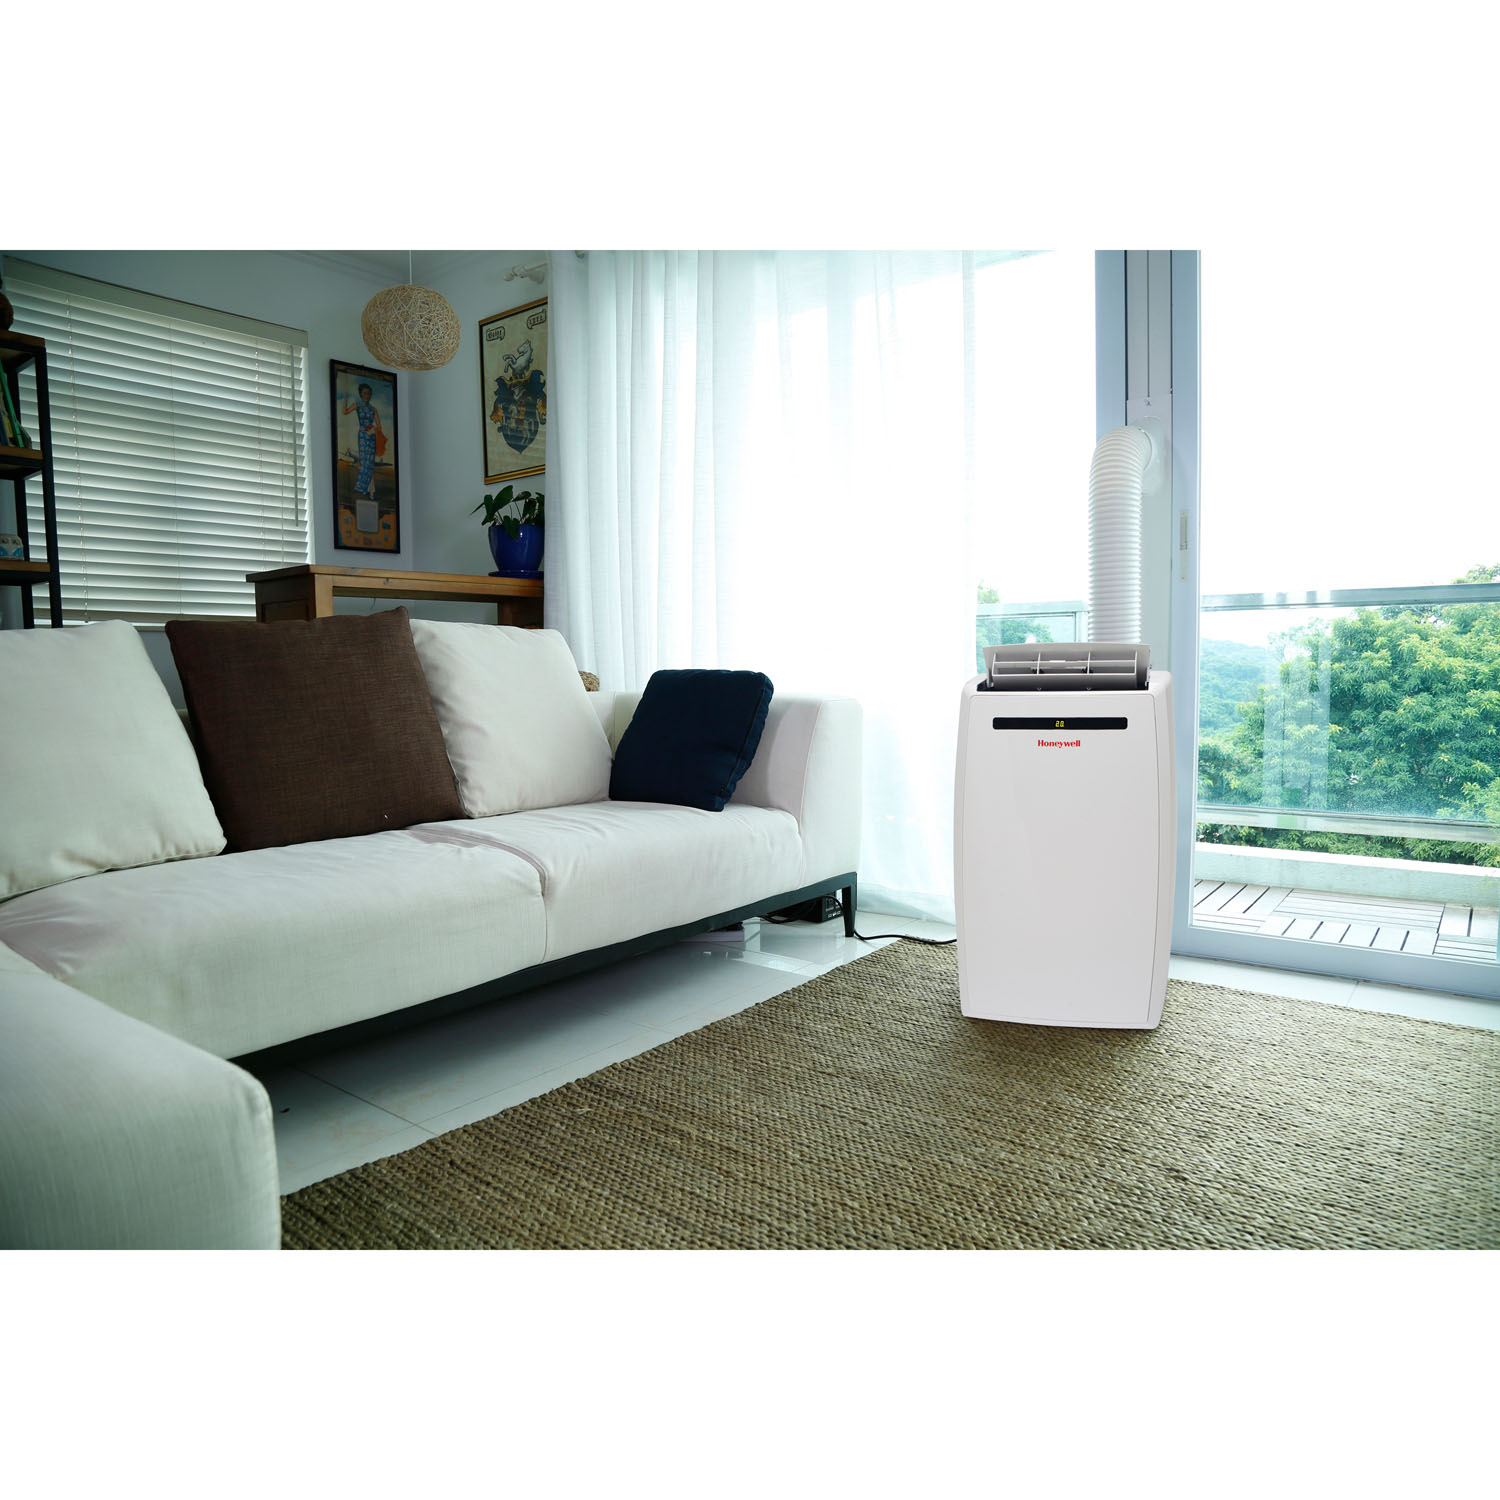 Honeywell MN Series Portable Air Conditioner with Dehumidifier and Remote Control for a Room up to 450 Sq. Ft. (White) - image 3 of 12